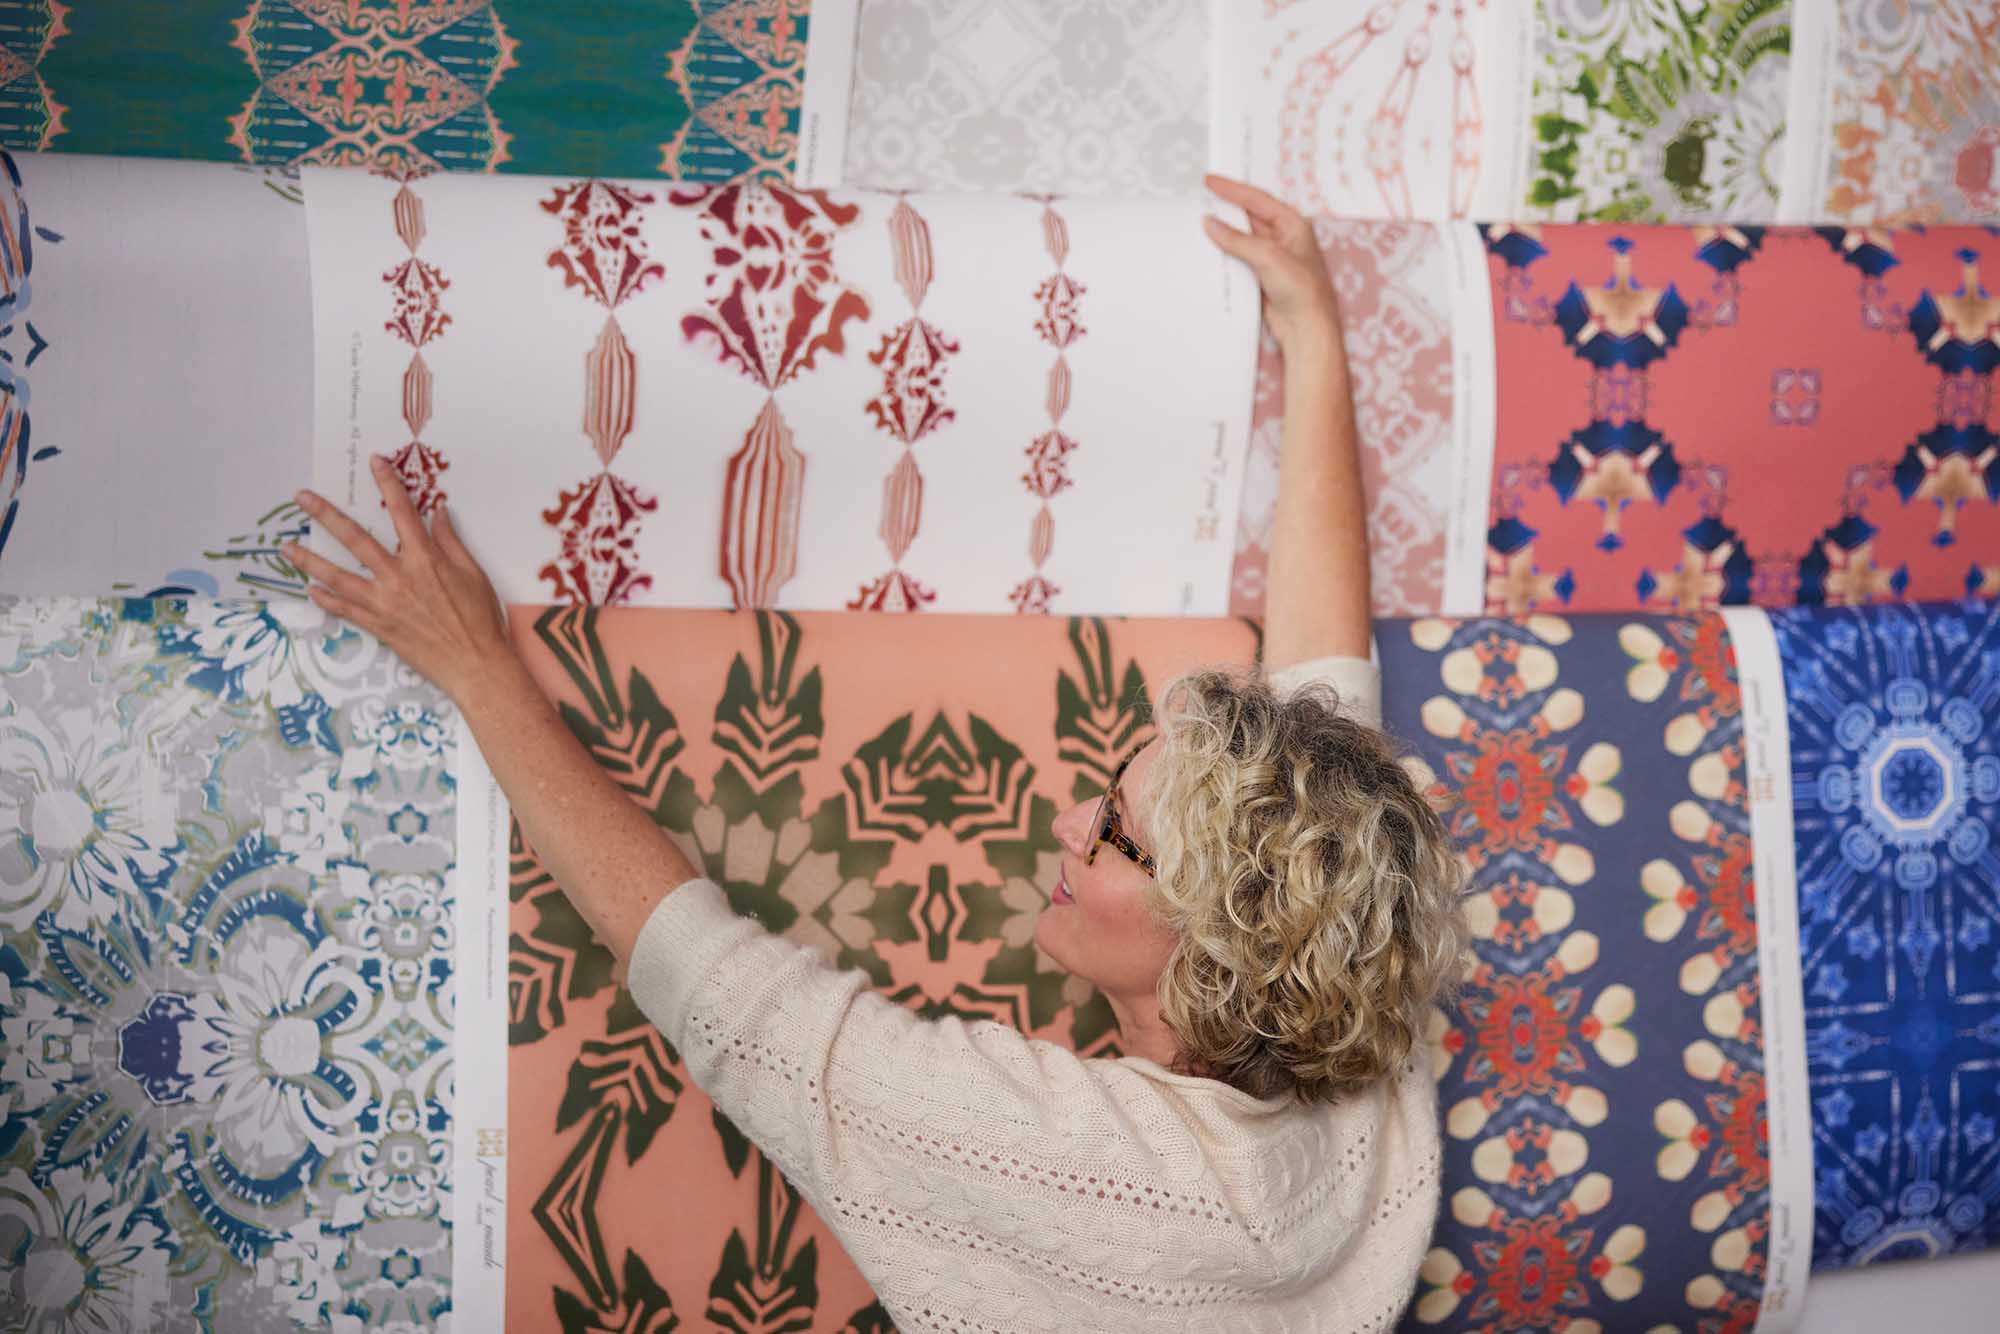 Teale Hatheway, founder and designer at Pearl & Maude Home, in the studio arranging her wallpaper designs